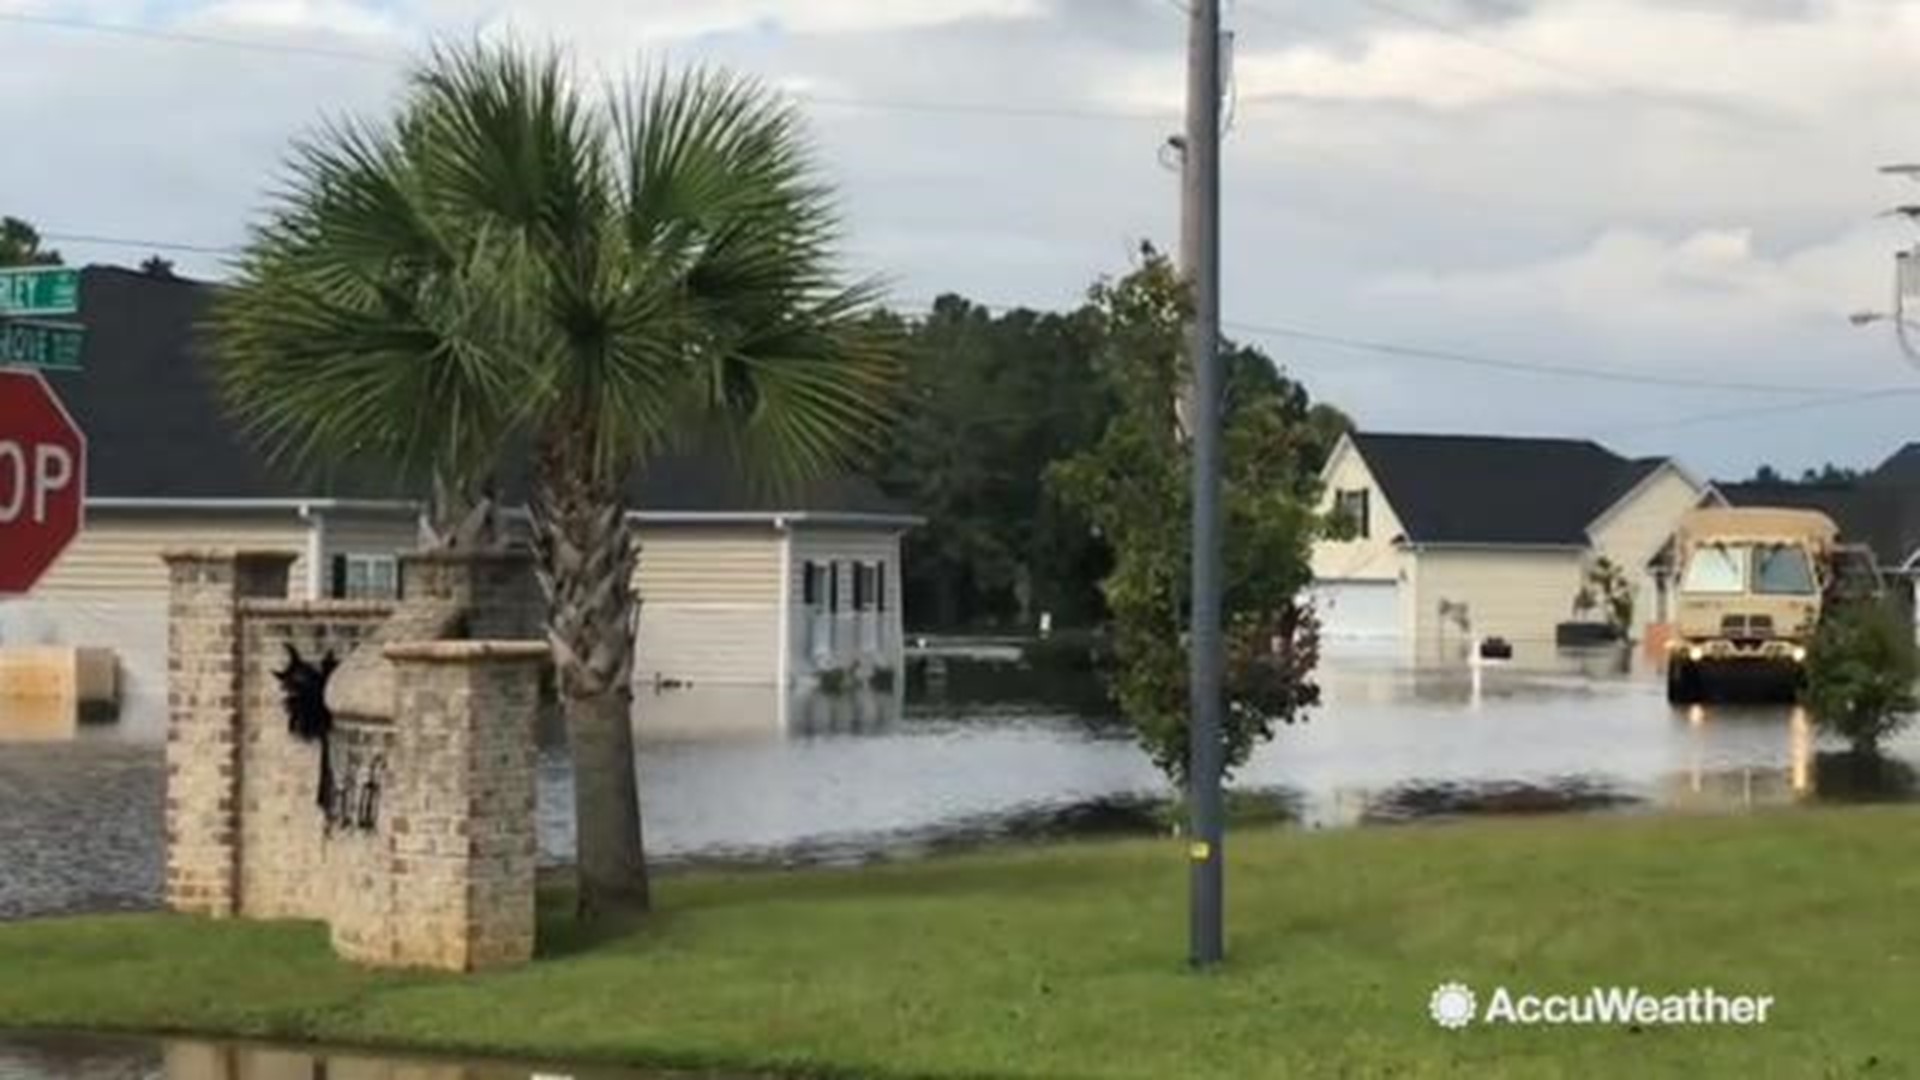 As residents nervously wait for the floodwaters to continue rising, they share their thoughts on how it has affected them.  For some, it was the first time they've ever experienced such flooding.